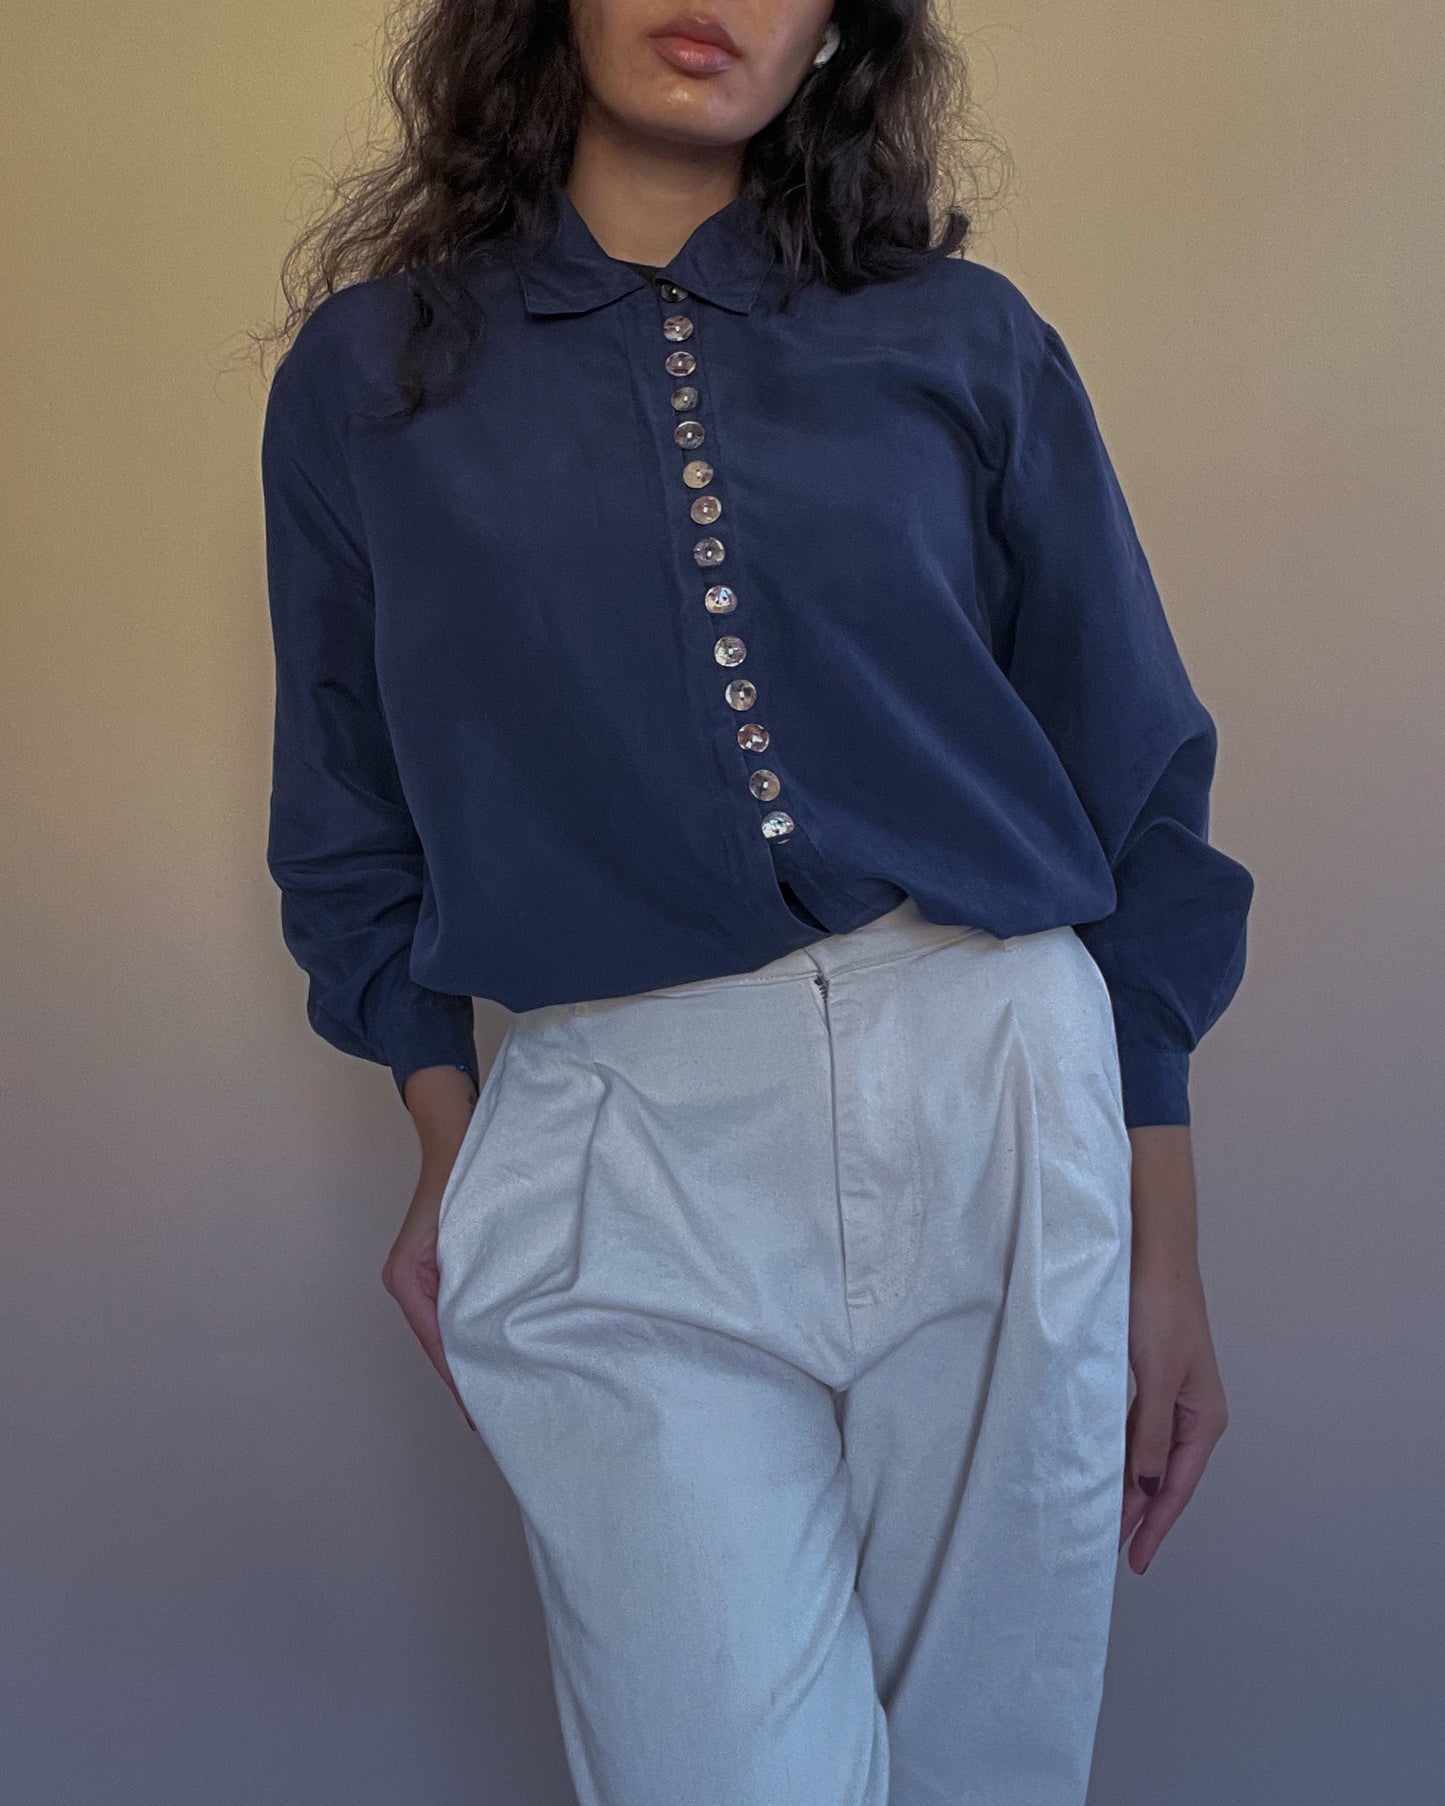 Vintage Navy Silk Blouse With Texturized Buttons